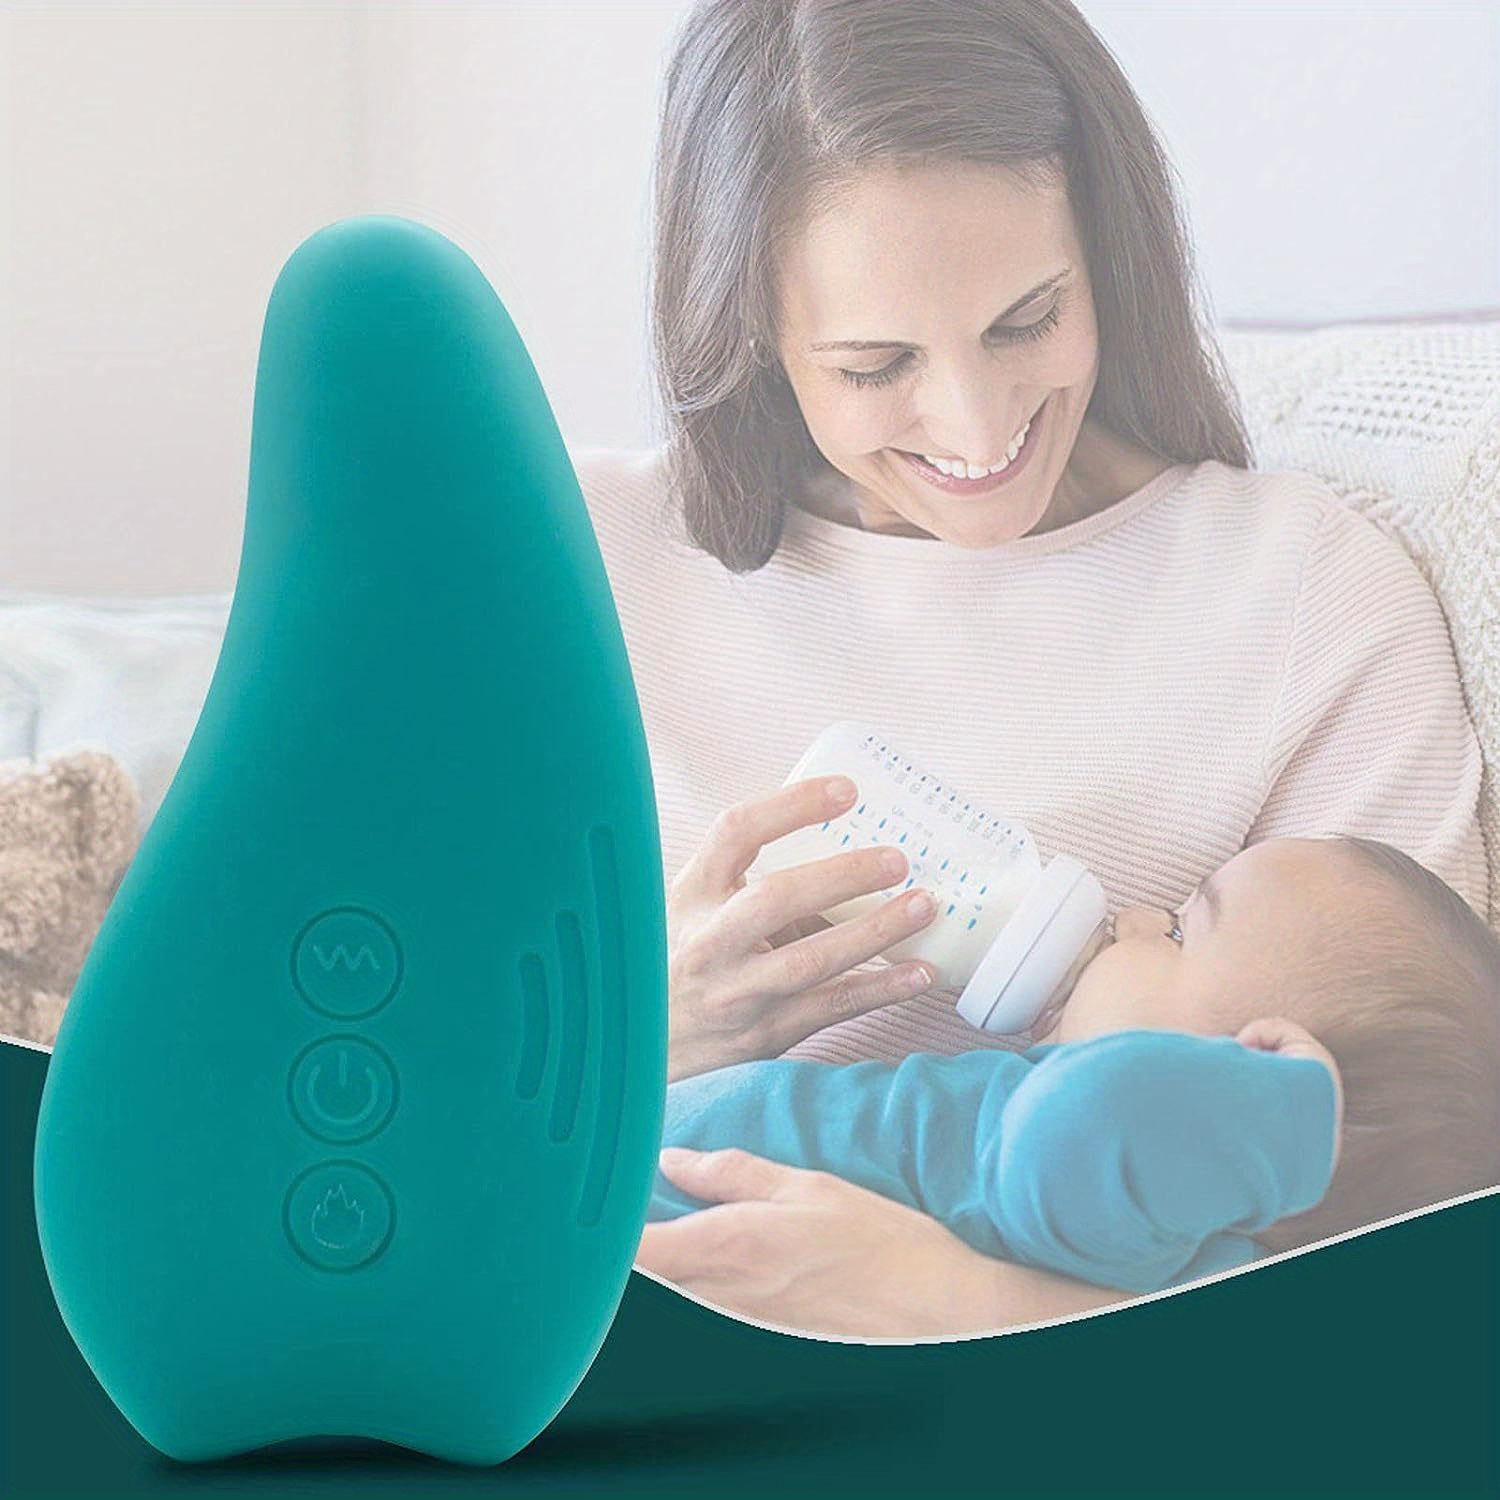 Lactation Massager With 3 Modes Of Heat And 10 Modes Of Vibration Warming  Breast Massager Breastfeeding For Clogged Duct Mastitis Engorgement Relief  Improve Milk Flow Pumping, Find Great Deals Now